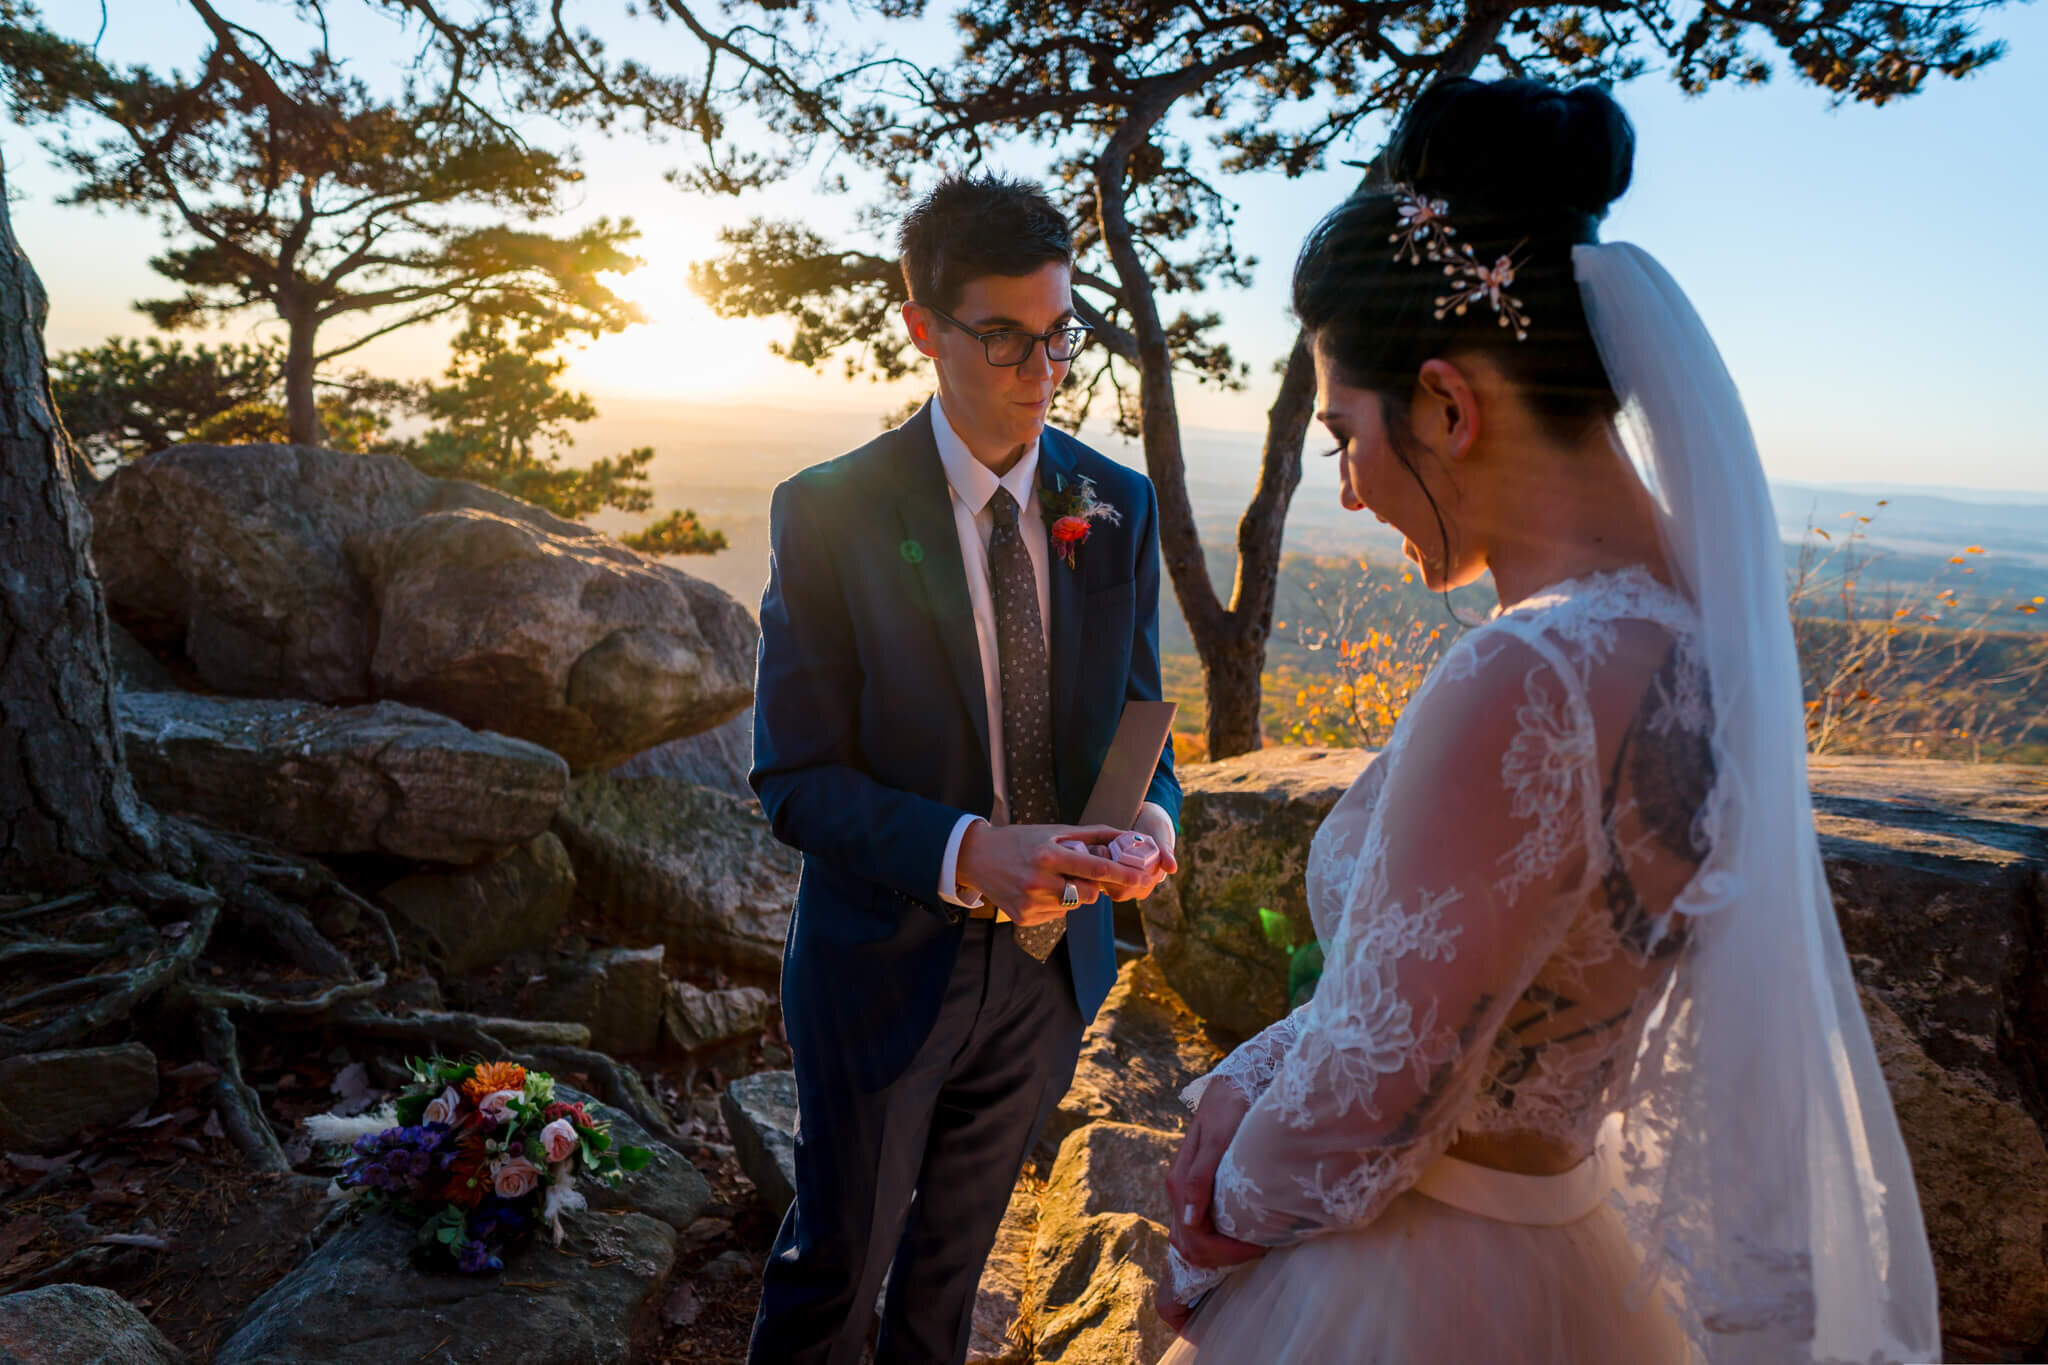 02-Ayla-Lee-Sugarloaf-Mountain-Elopement-Autumn-Summit-Wedding-Ceremony-Photography-by-Bee-Two-Sweet-56.jpg